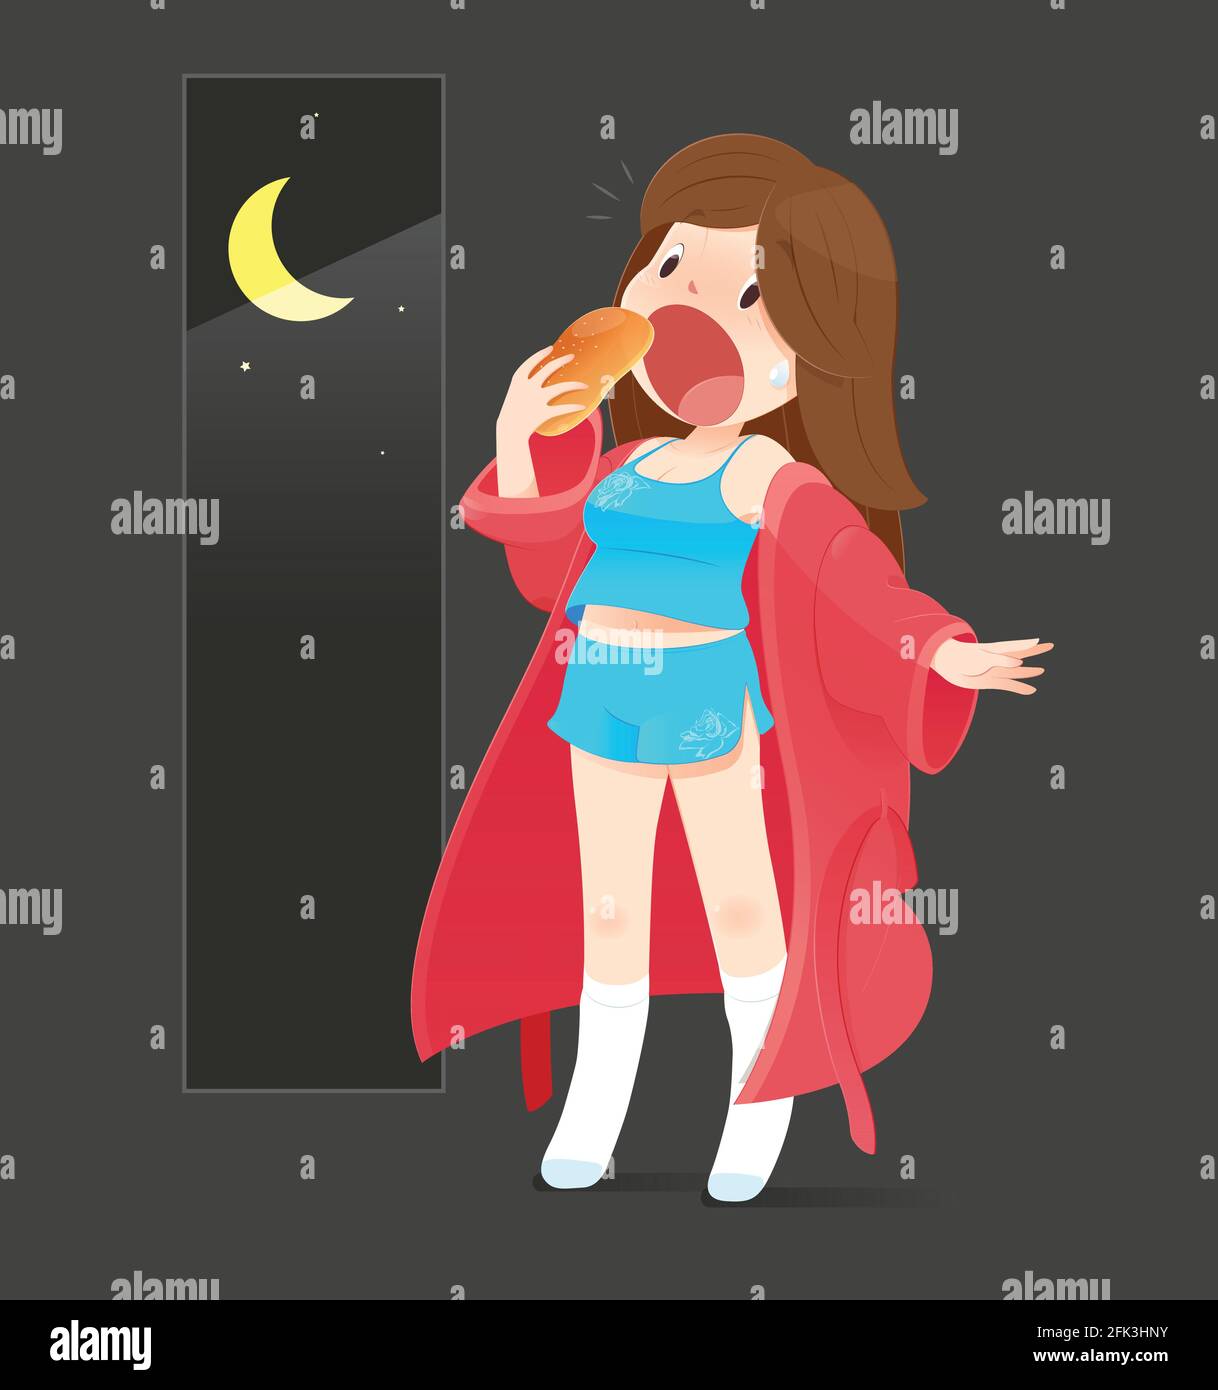 The woman is eating bread because she hungry at night, Illustration cute girl in blue nightwear and red robe, Cartoon vector Stock Vector